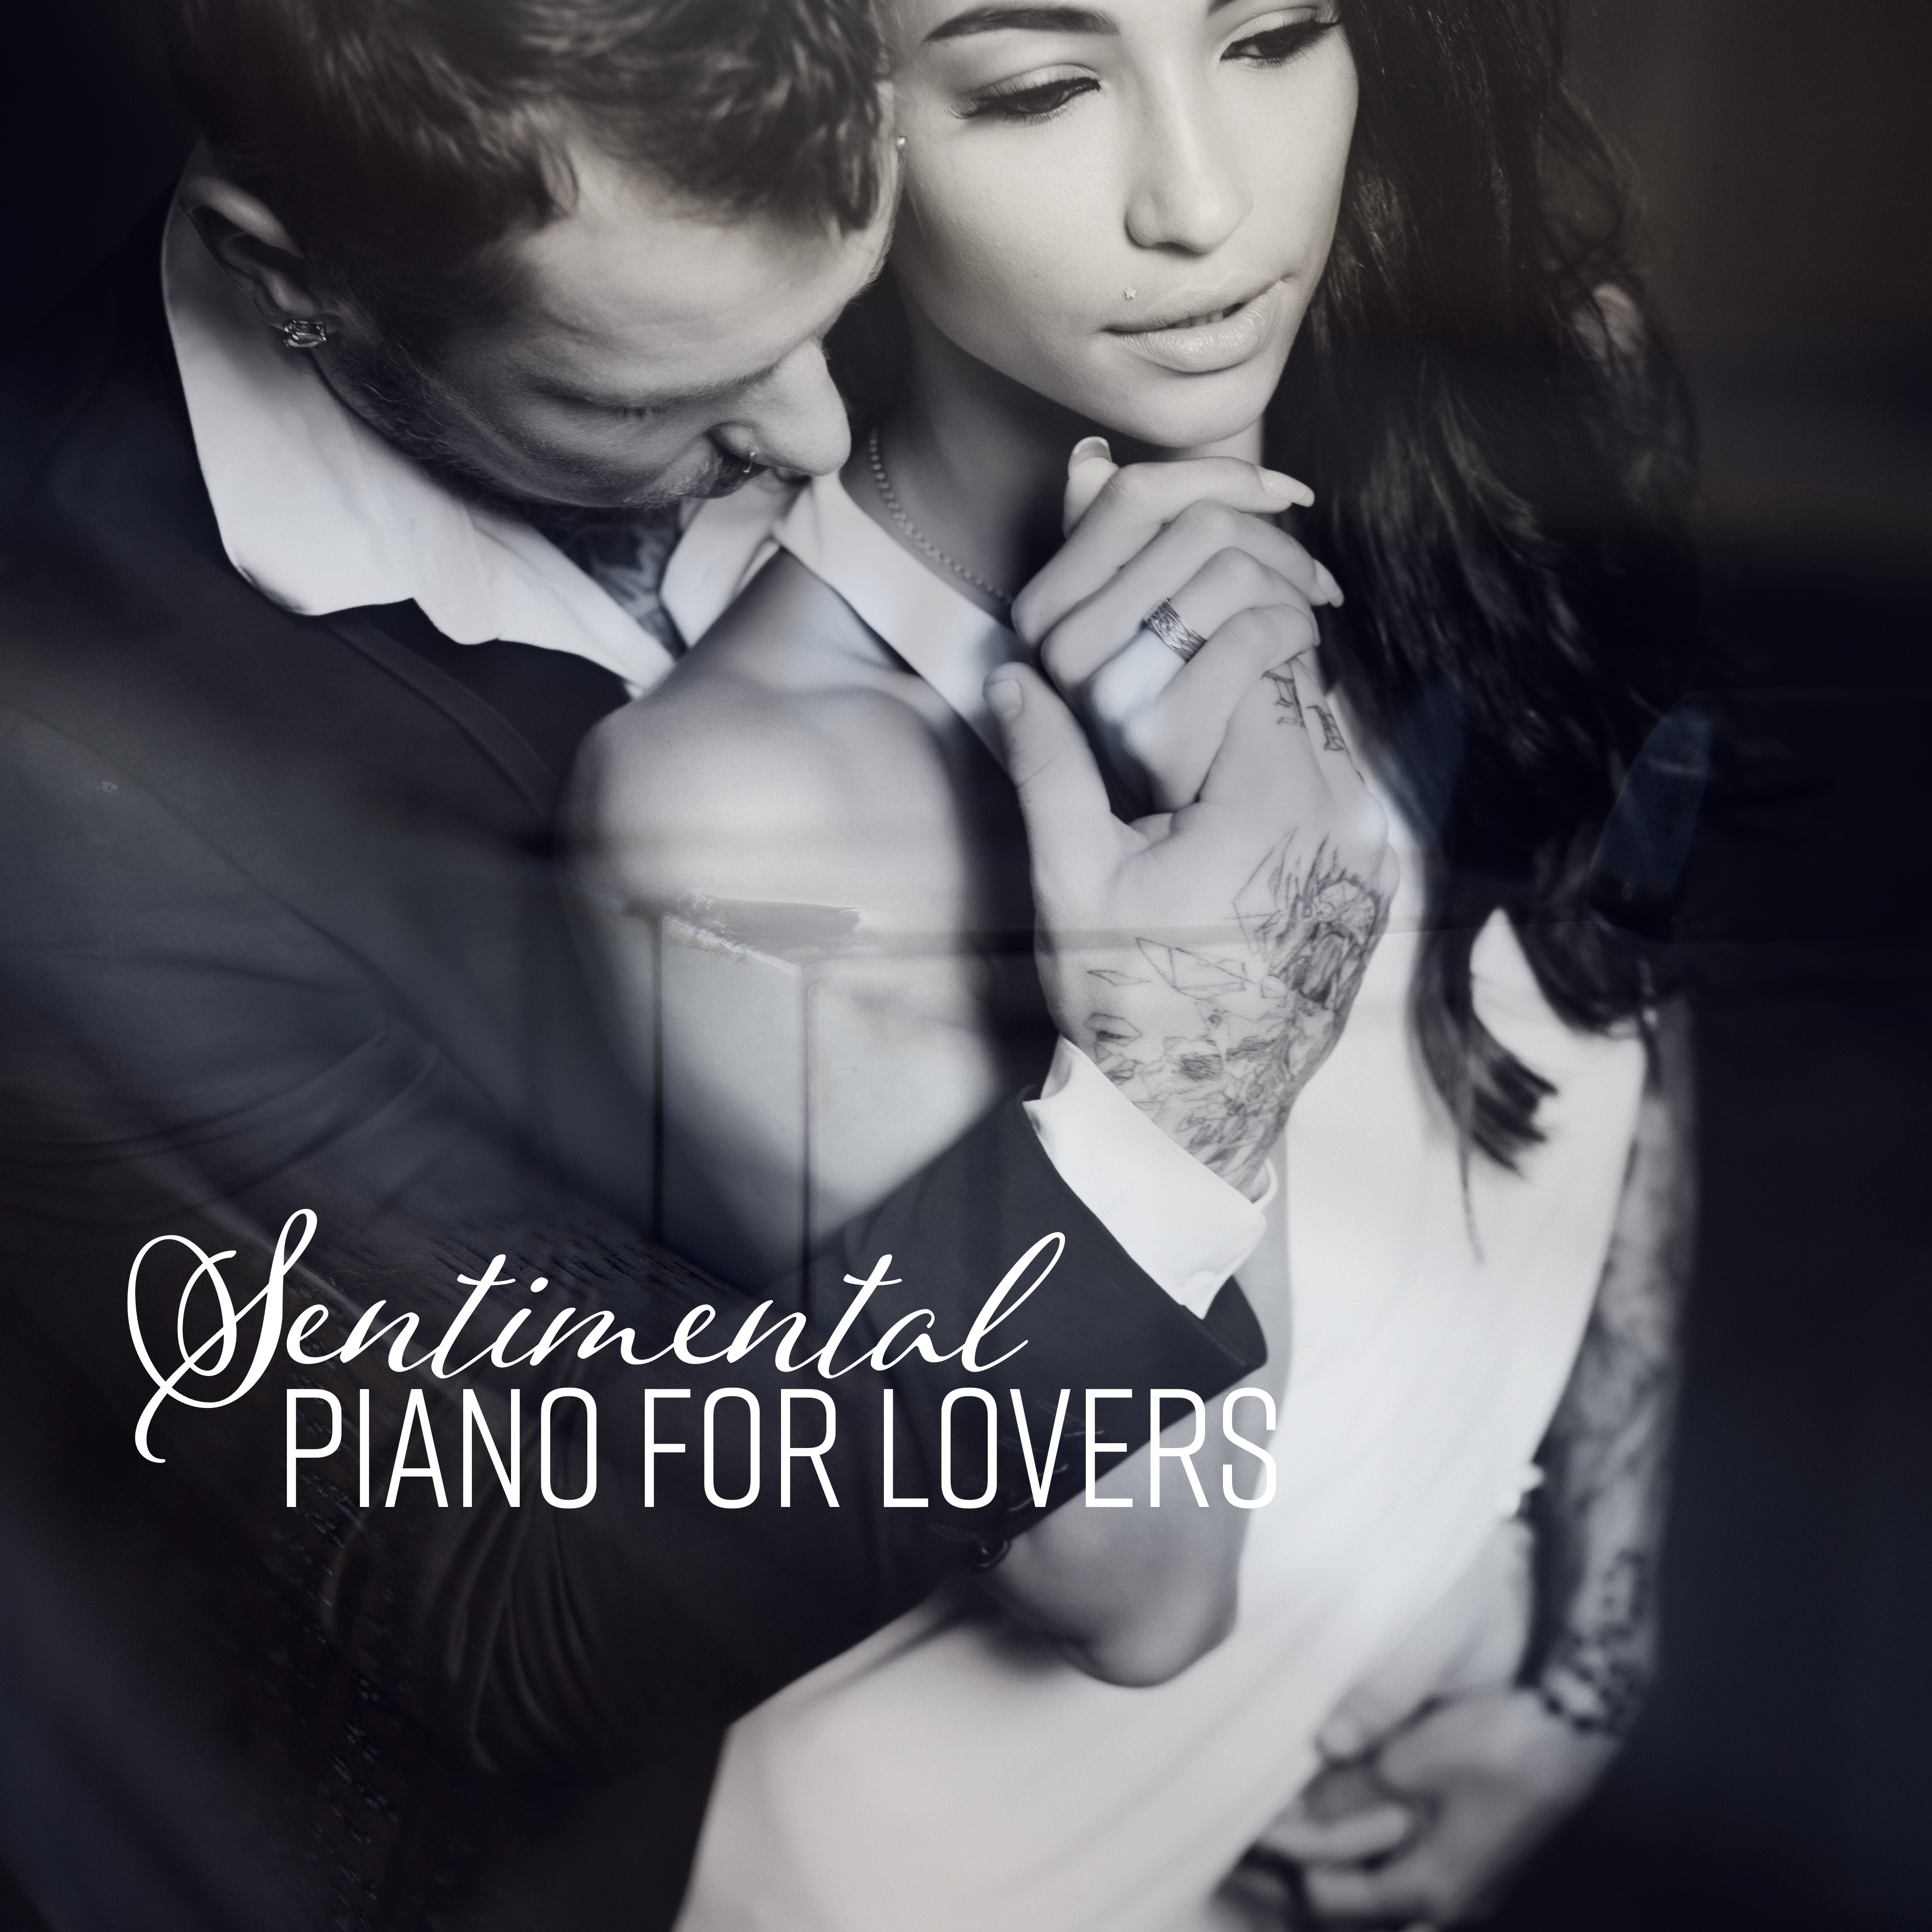 Sentimental Piano for Lovers